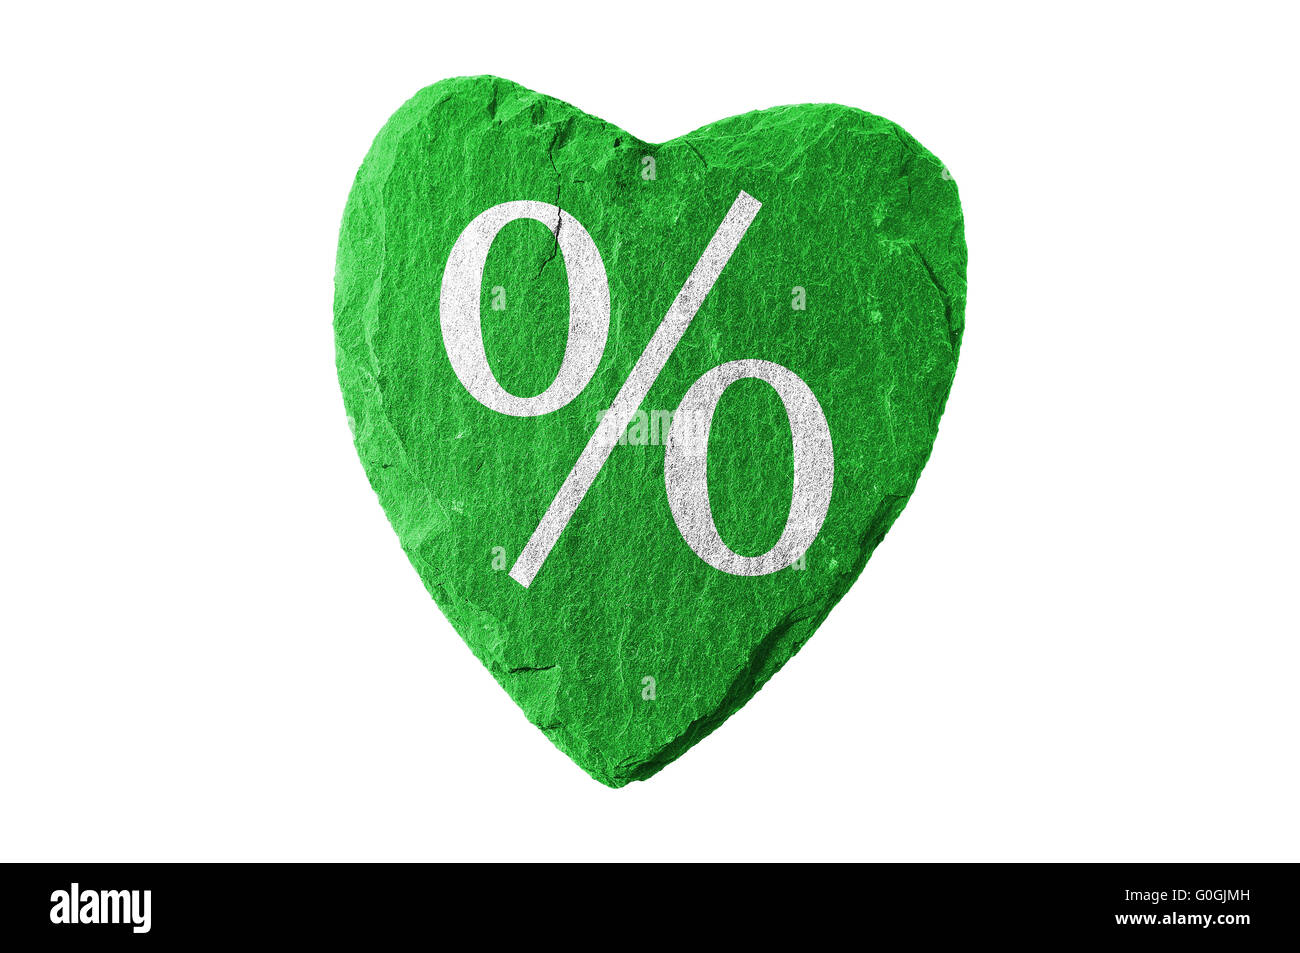 green heart with percent symbol Stock Photo